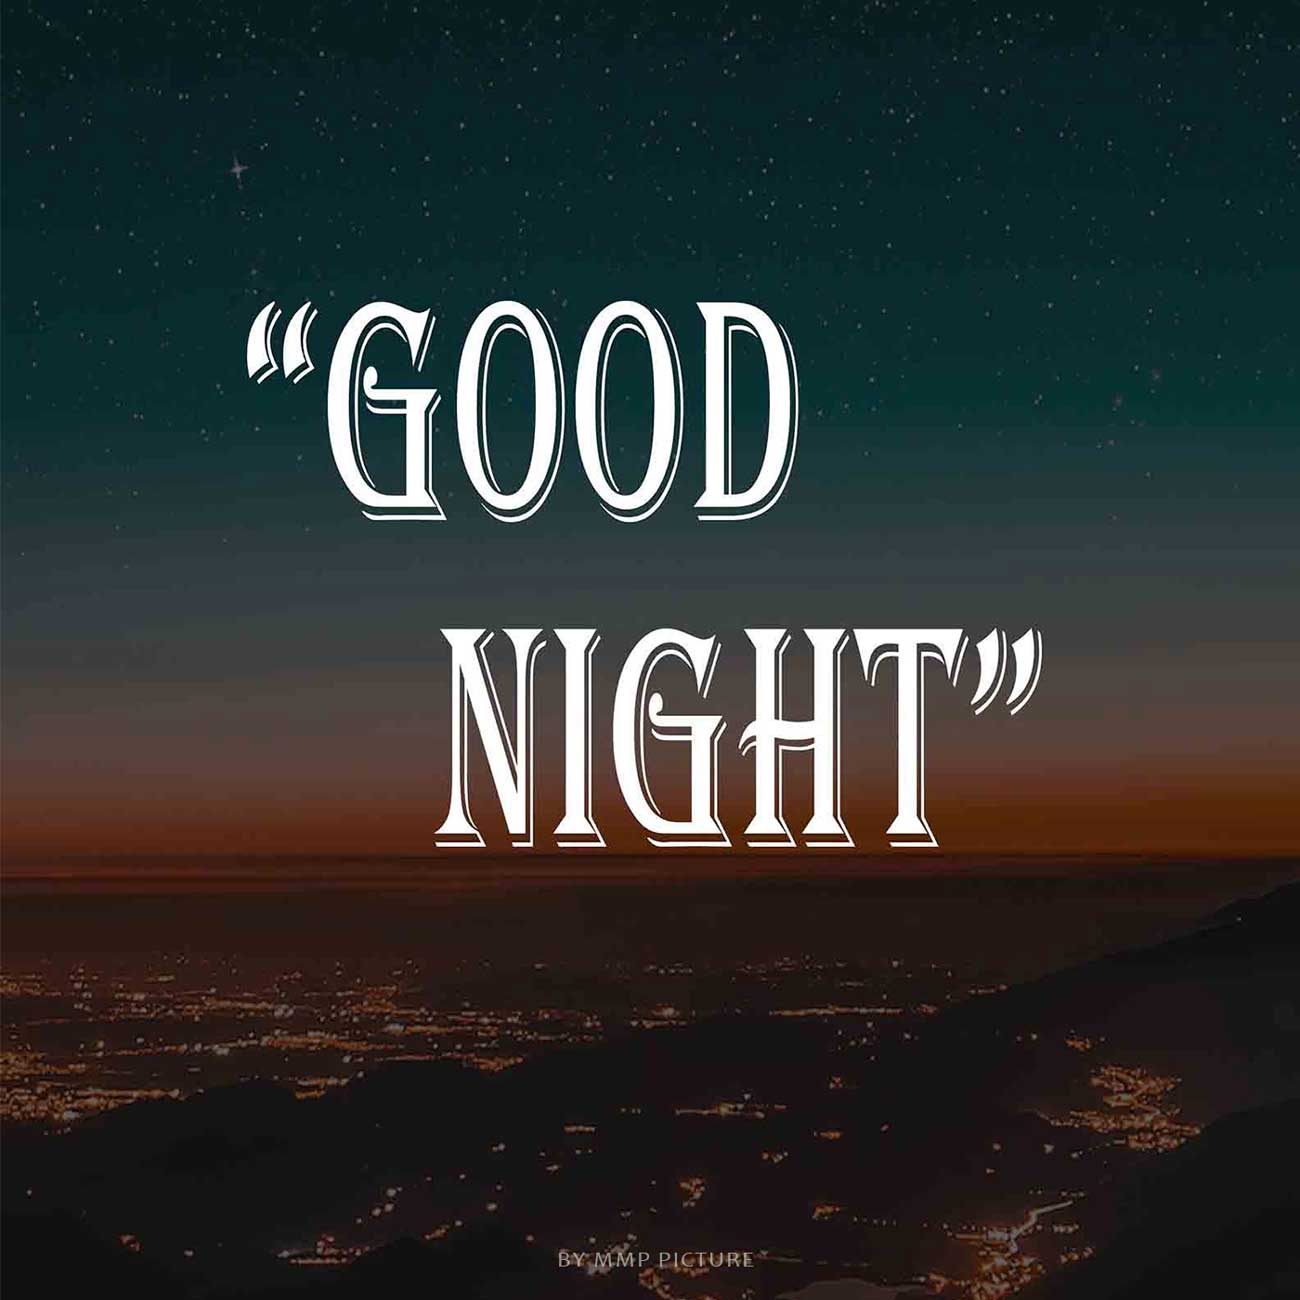 New Simple Good Night Wishing Image Quote [ Download ]